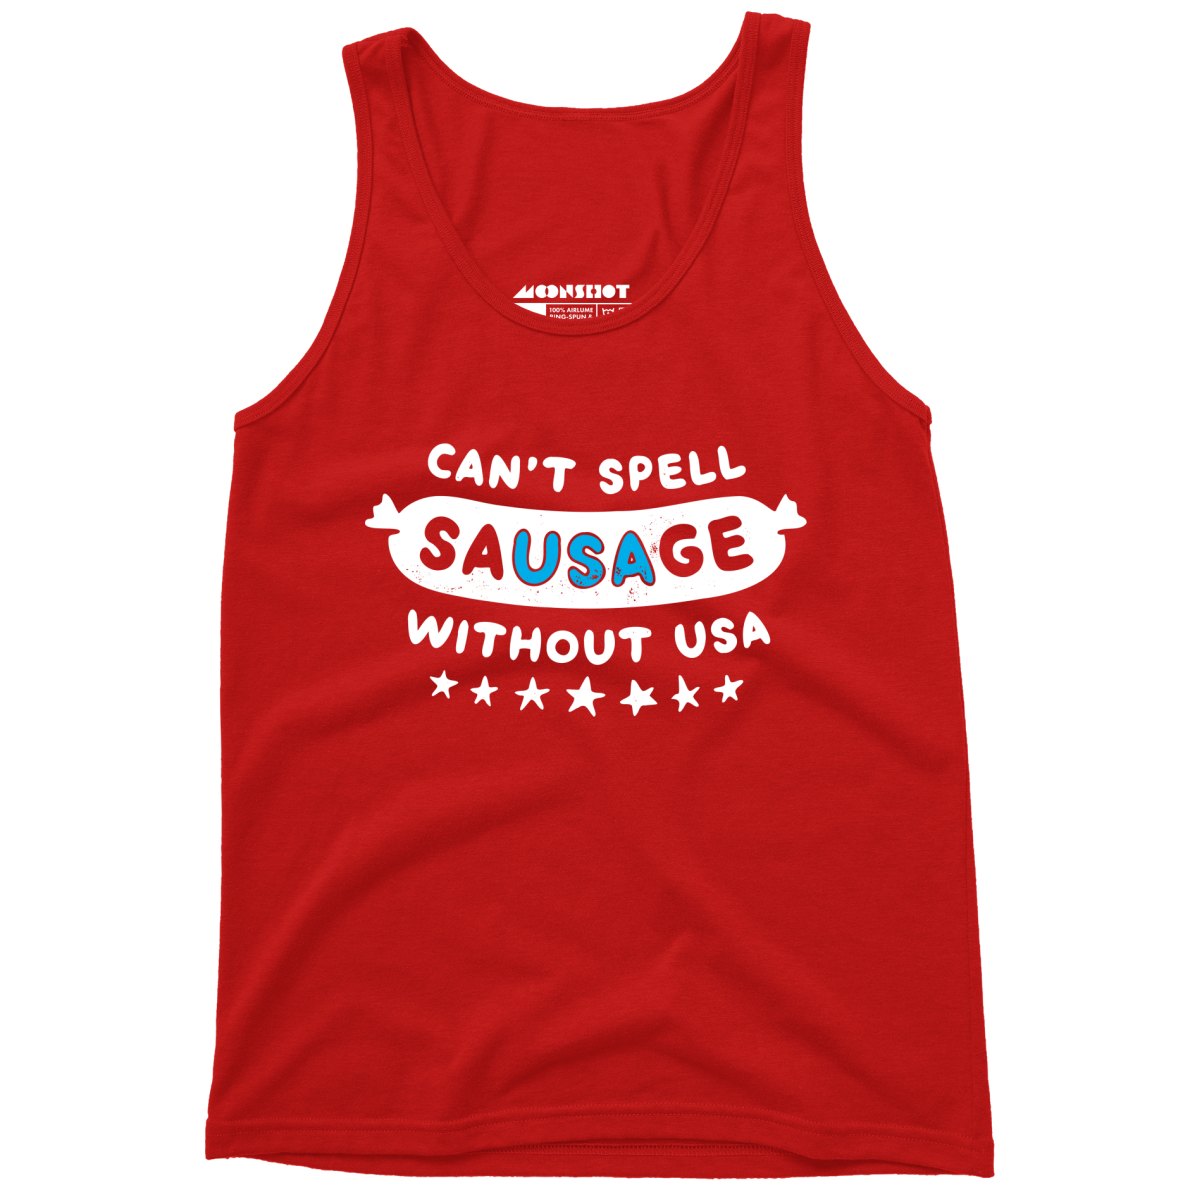 Can't Spell Sausage Without USA - Unisex Tank Top